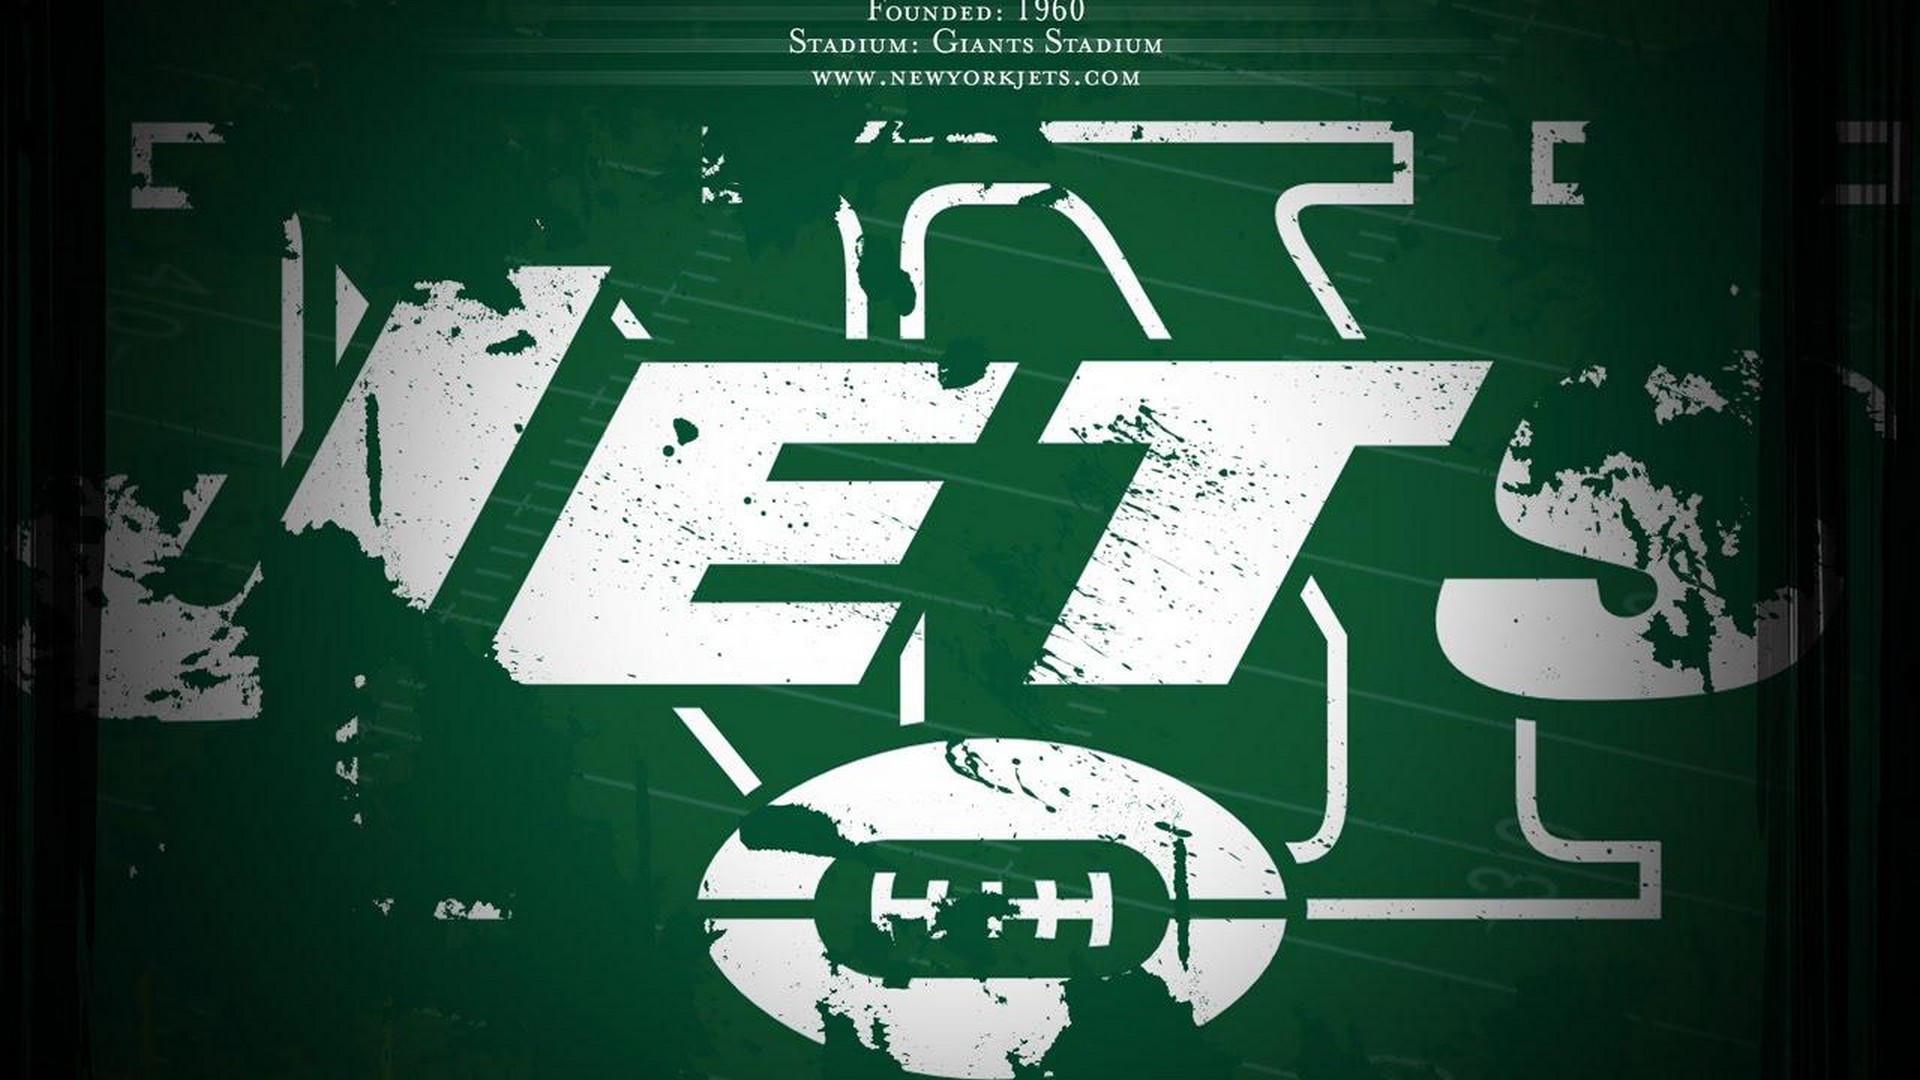 HD Backgrounds New York Jets with resolution 1920x1080 pixel. You can make this wallpaper for your Mac or Windows Desktop Background, iPhone, Android or Tablet and another Smartphone device